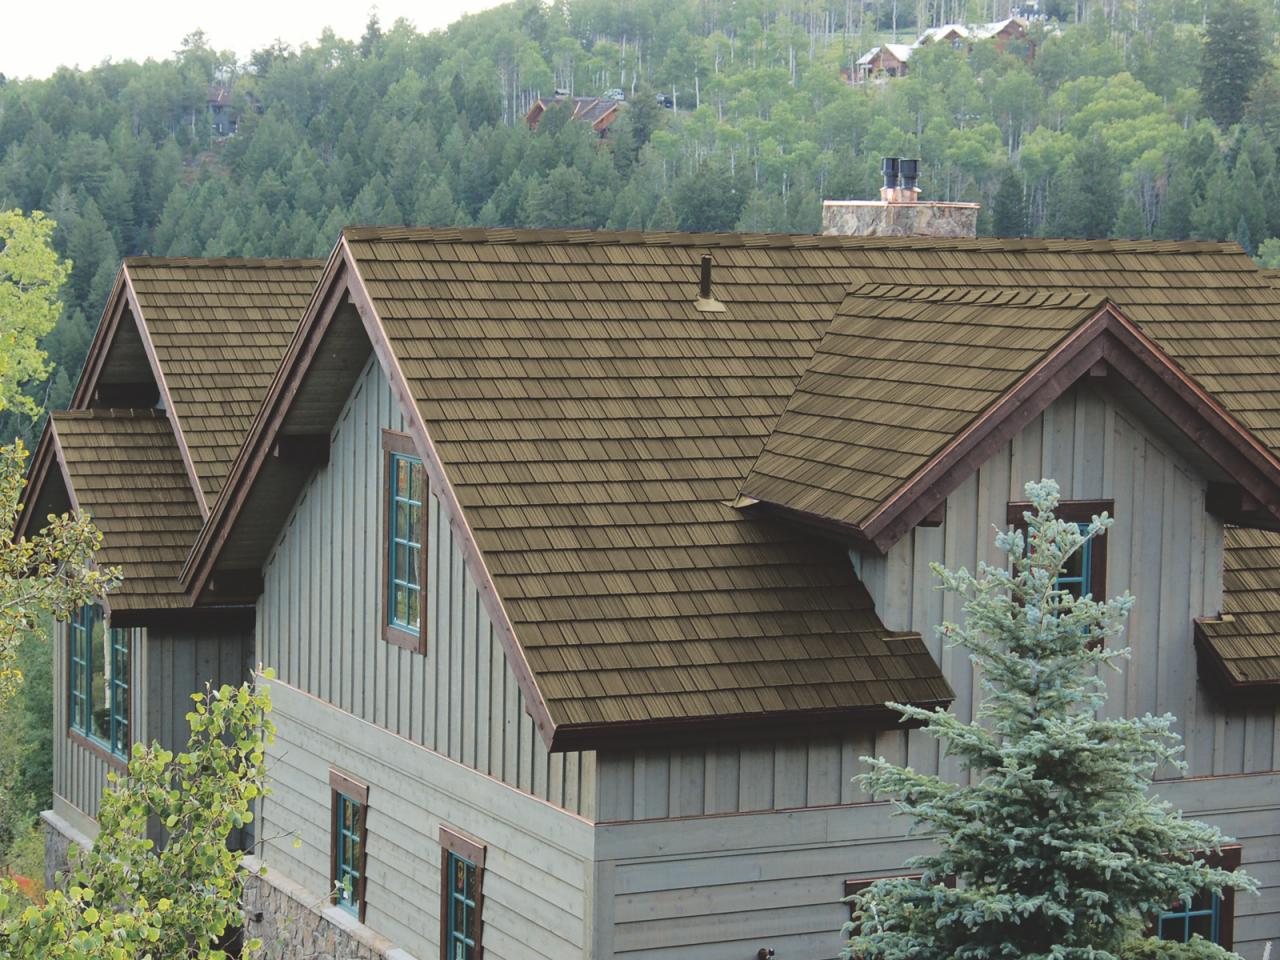 Wdr Roofing Company